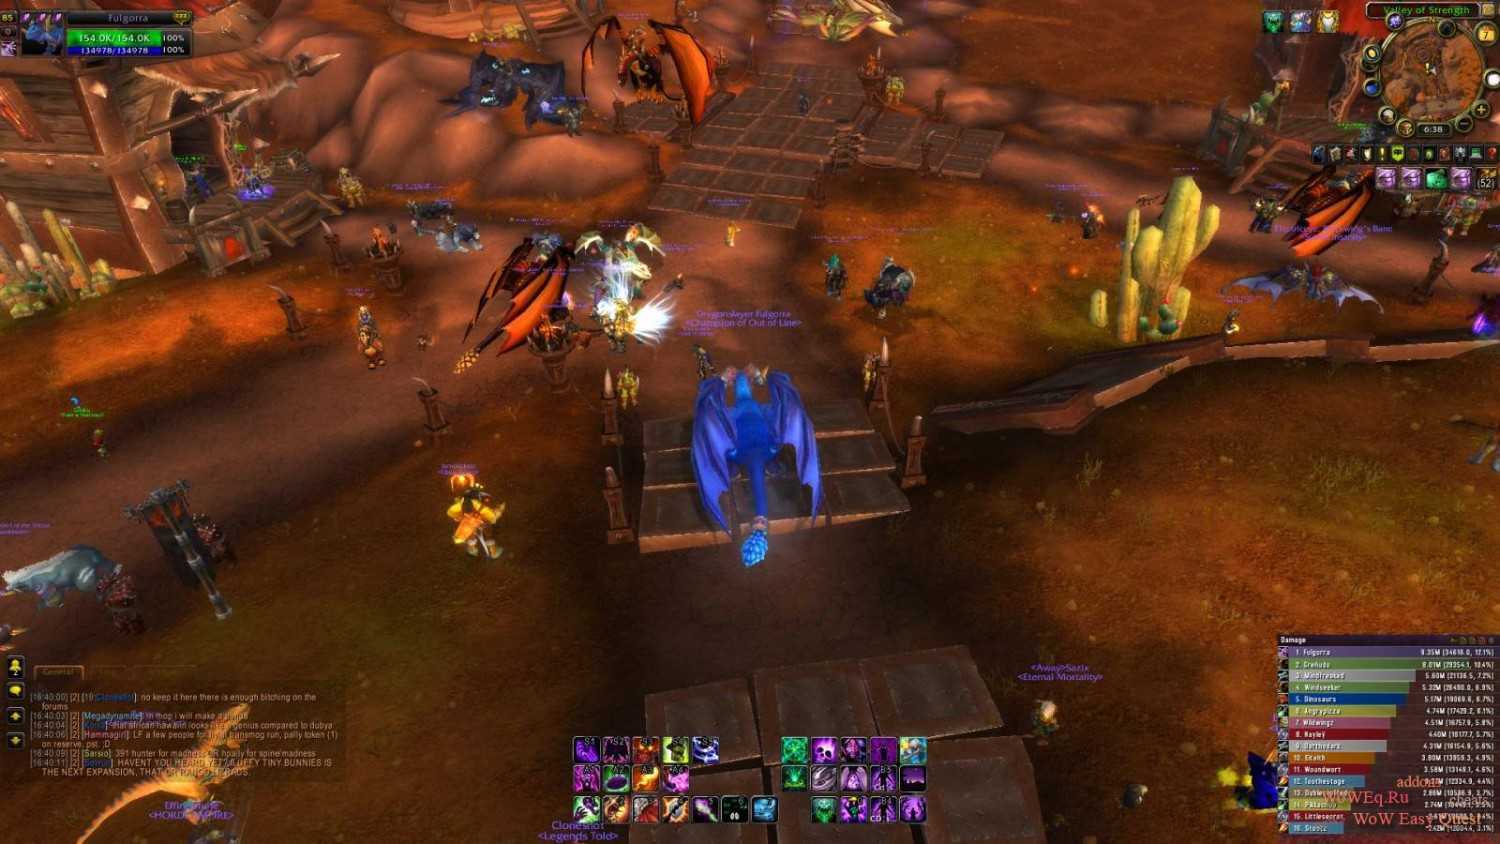 Wow classic addons: the best addons for world of warcraft classic and how to install them | gamesradar+